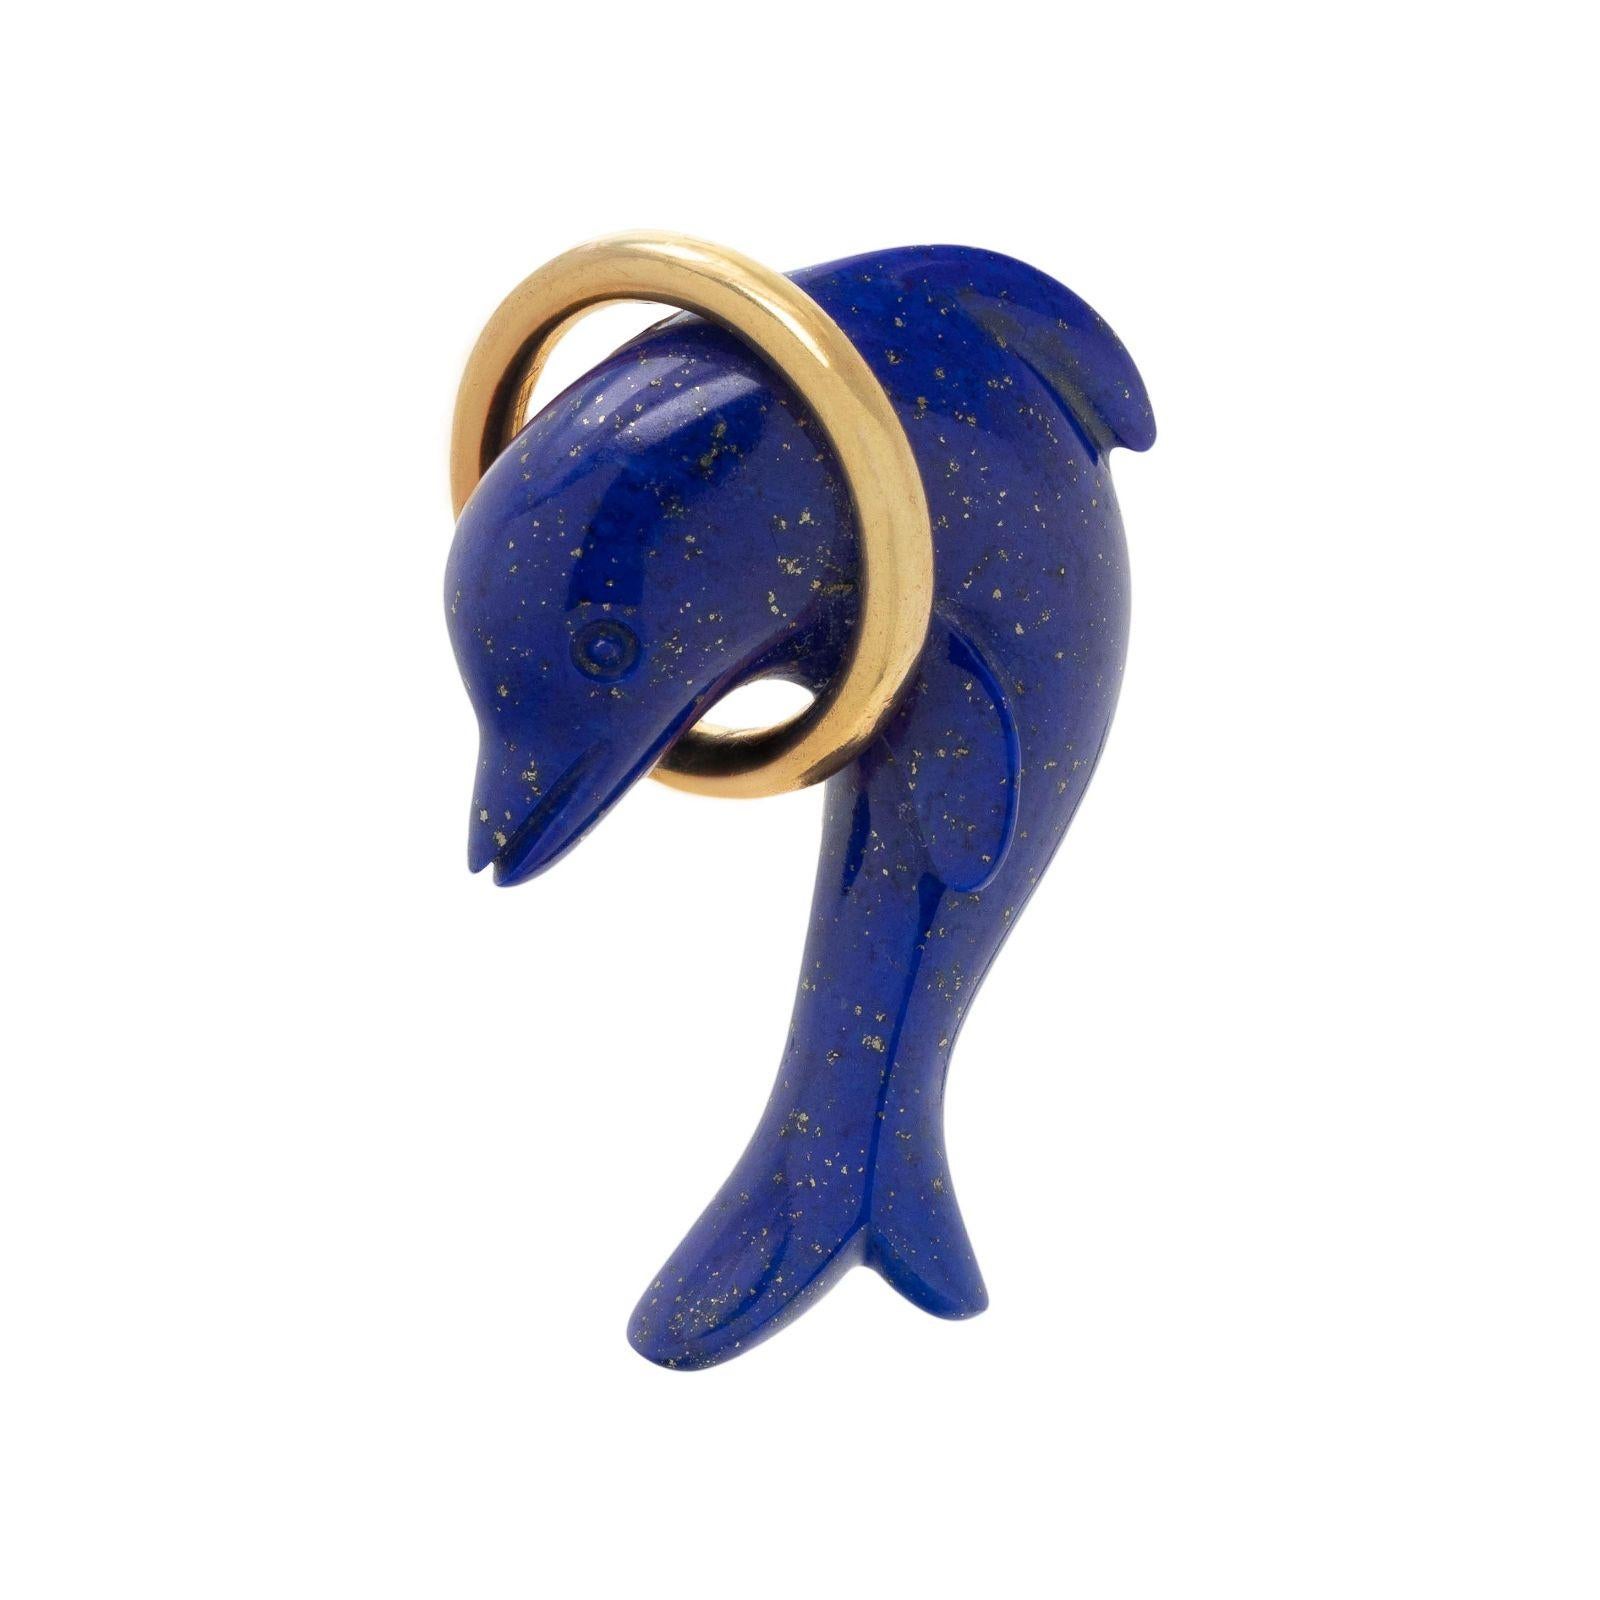 Tiffany & Co. 18k Yellow Gold & Lapis Dolphin Pin Circa 1980s Vintage

Here is your chance to purchase a beautiful and highly collectible designer pin.  Truly a great piece at a great price! 

Details:
1 1/8